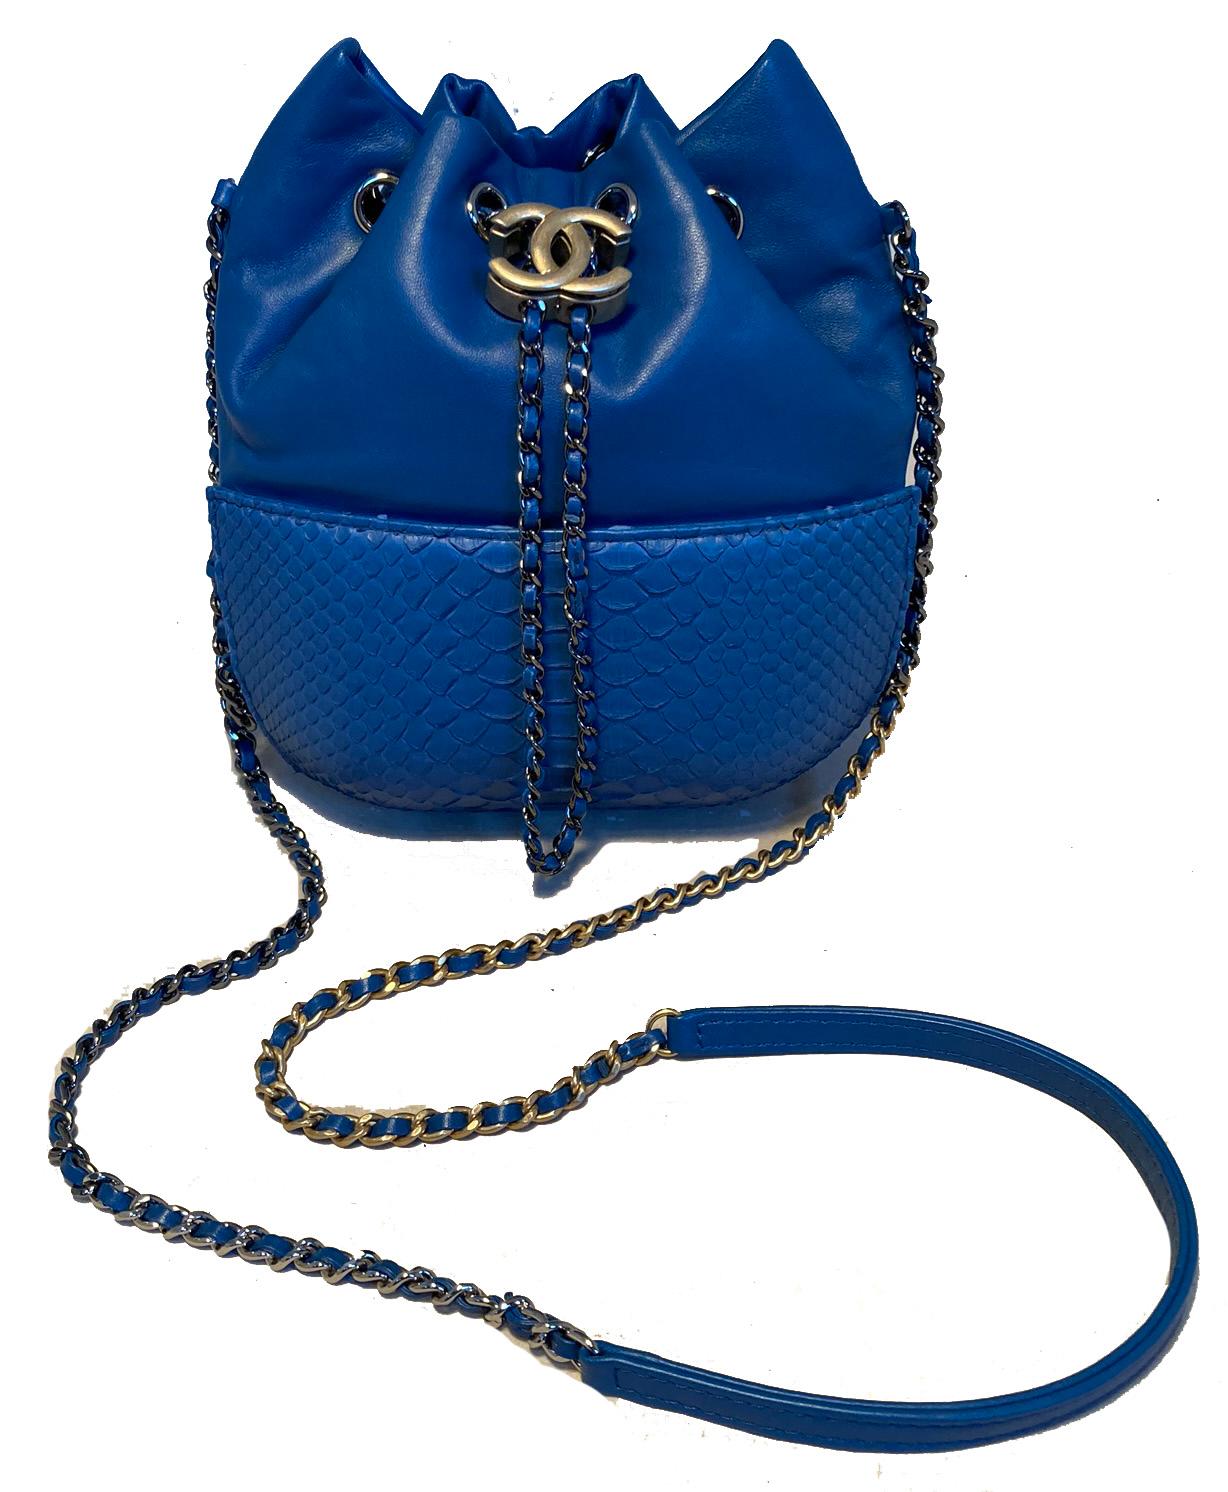 Chanel Small Blue Leather and Python Gabrielle Bucket Bag in excellent condition. Beautiful limited edition blue leather and python exterior. Soft lambskin leather top with structured python leather bottom trimmed with matte gold hardware. Small